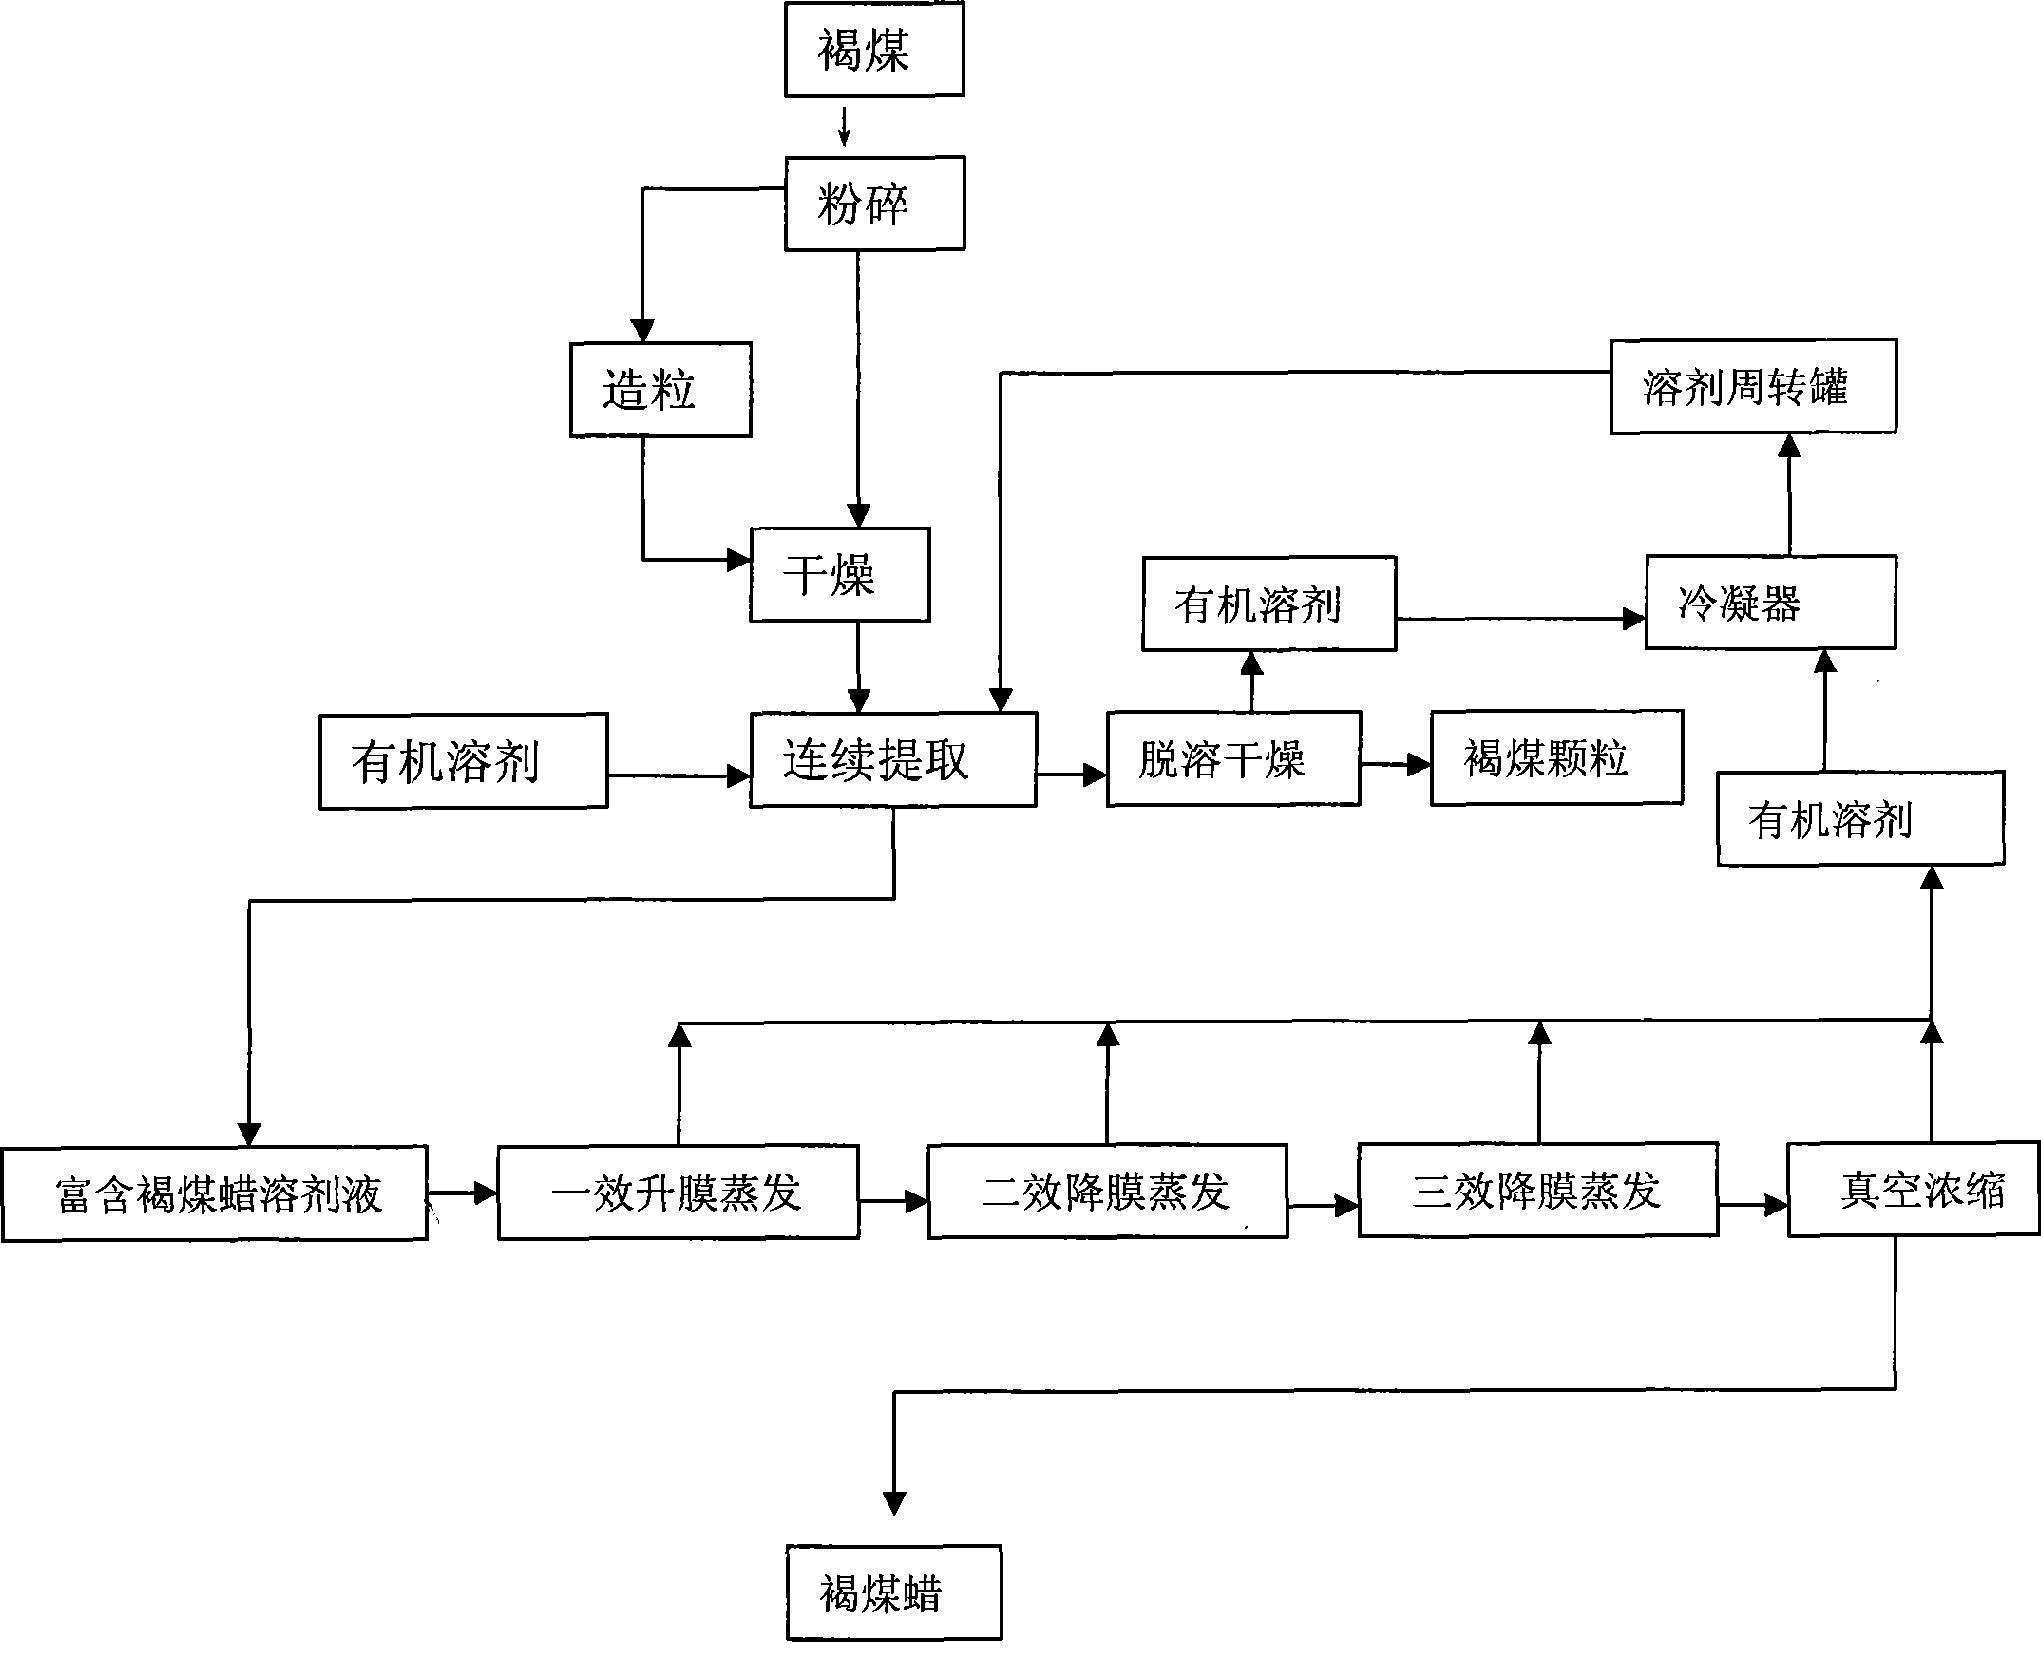 Method for extracting montan wax from lignite